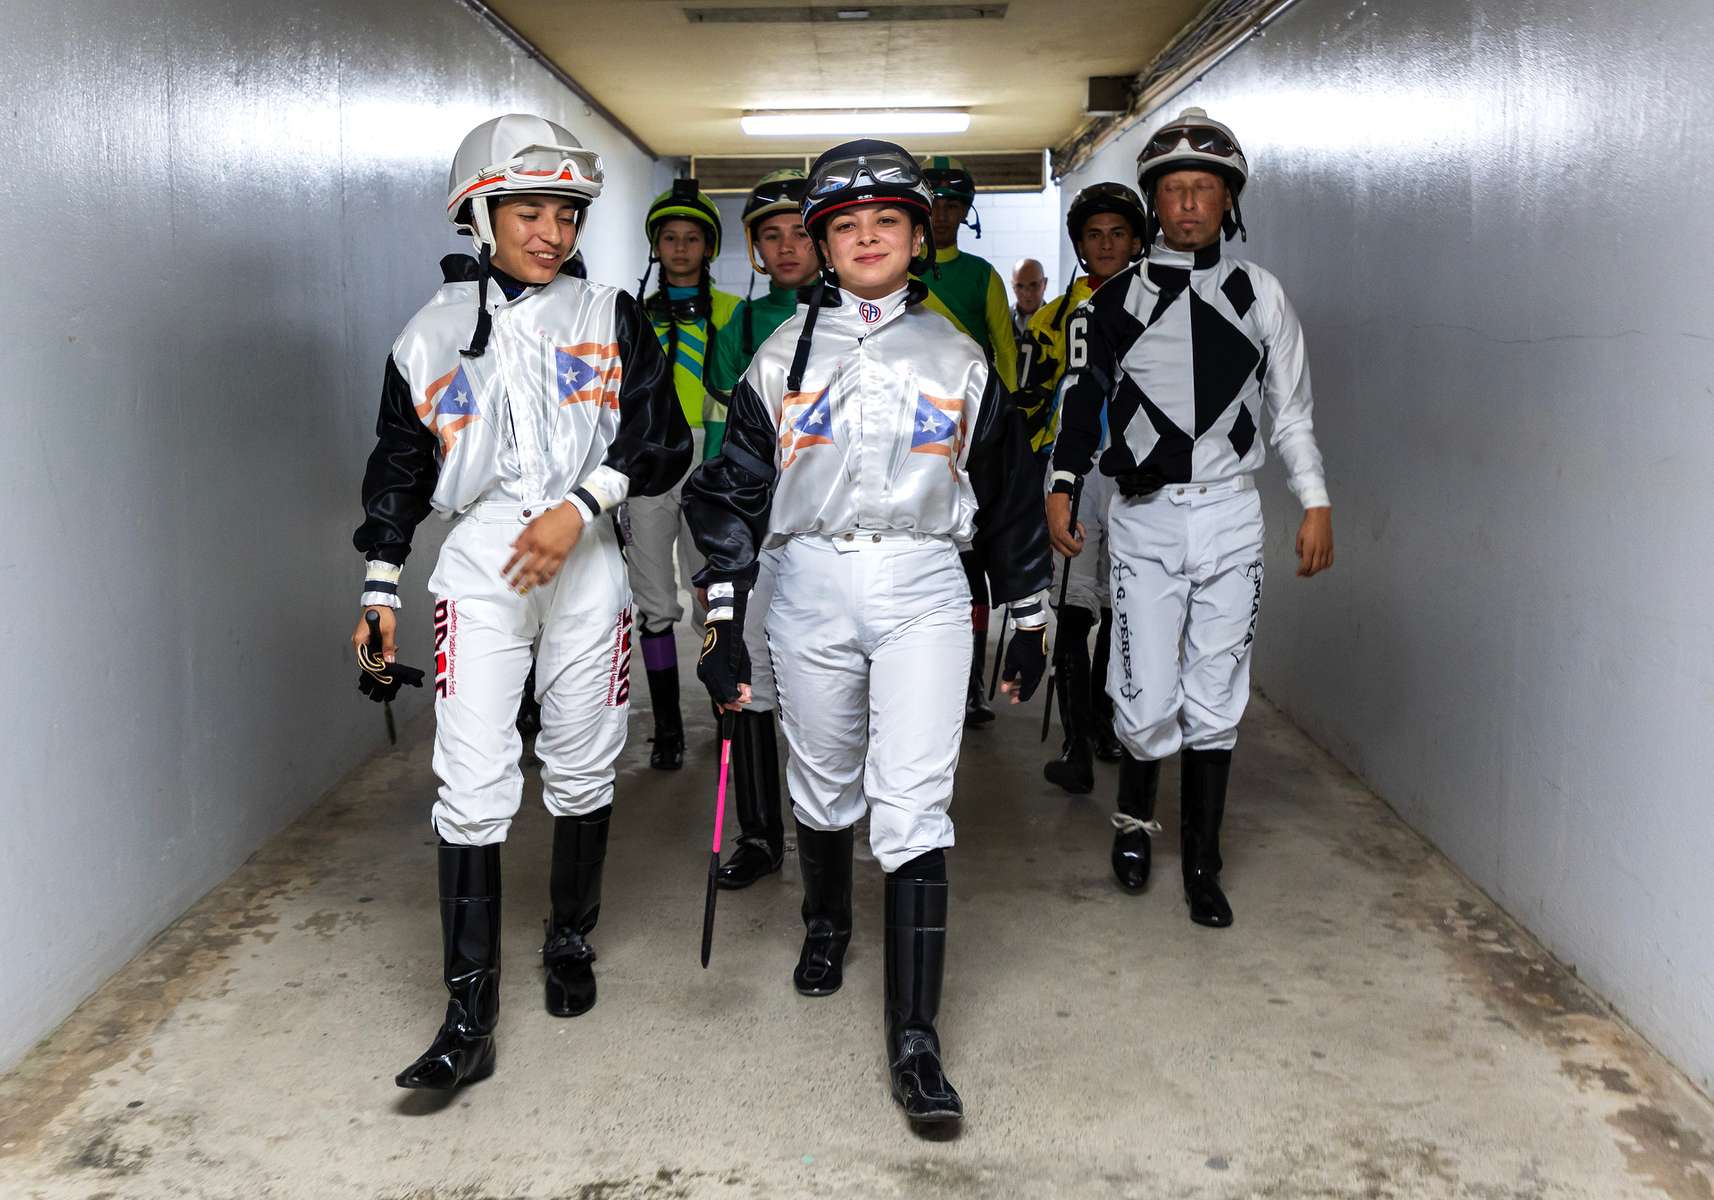 Student Jockeys make the walk from the locker room to the racetrack before their race at the Vocational Equestrian Agustín Mercado Reverón School located in the Hipódromo Camarero on November 18, 2022 in Canovanas, Puerto Rico. The Vocational Equestrian Agustín Mercado Reverón School has produced some of the best jockeys in the world but also prepares students for a wide range of equestrian jobs on a tuition-free basis. 